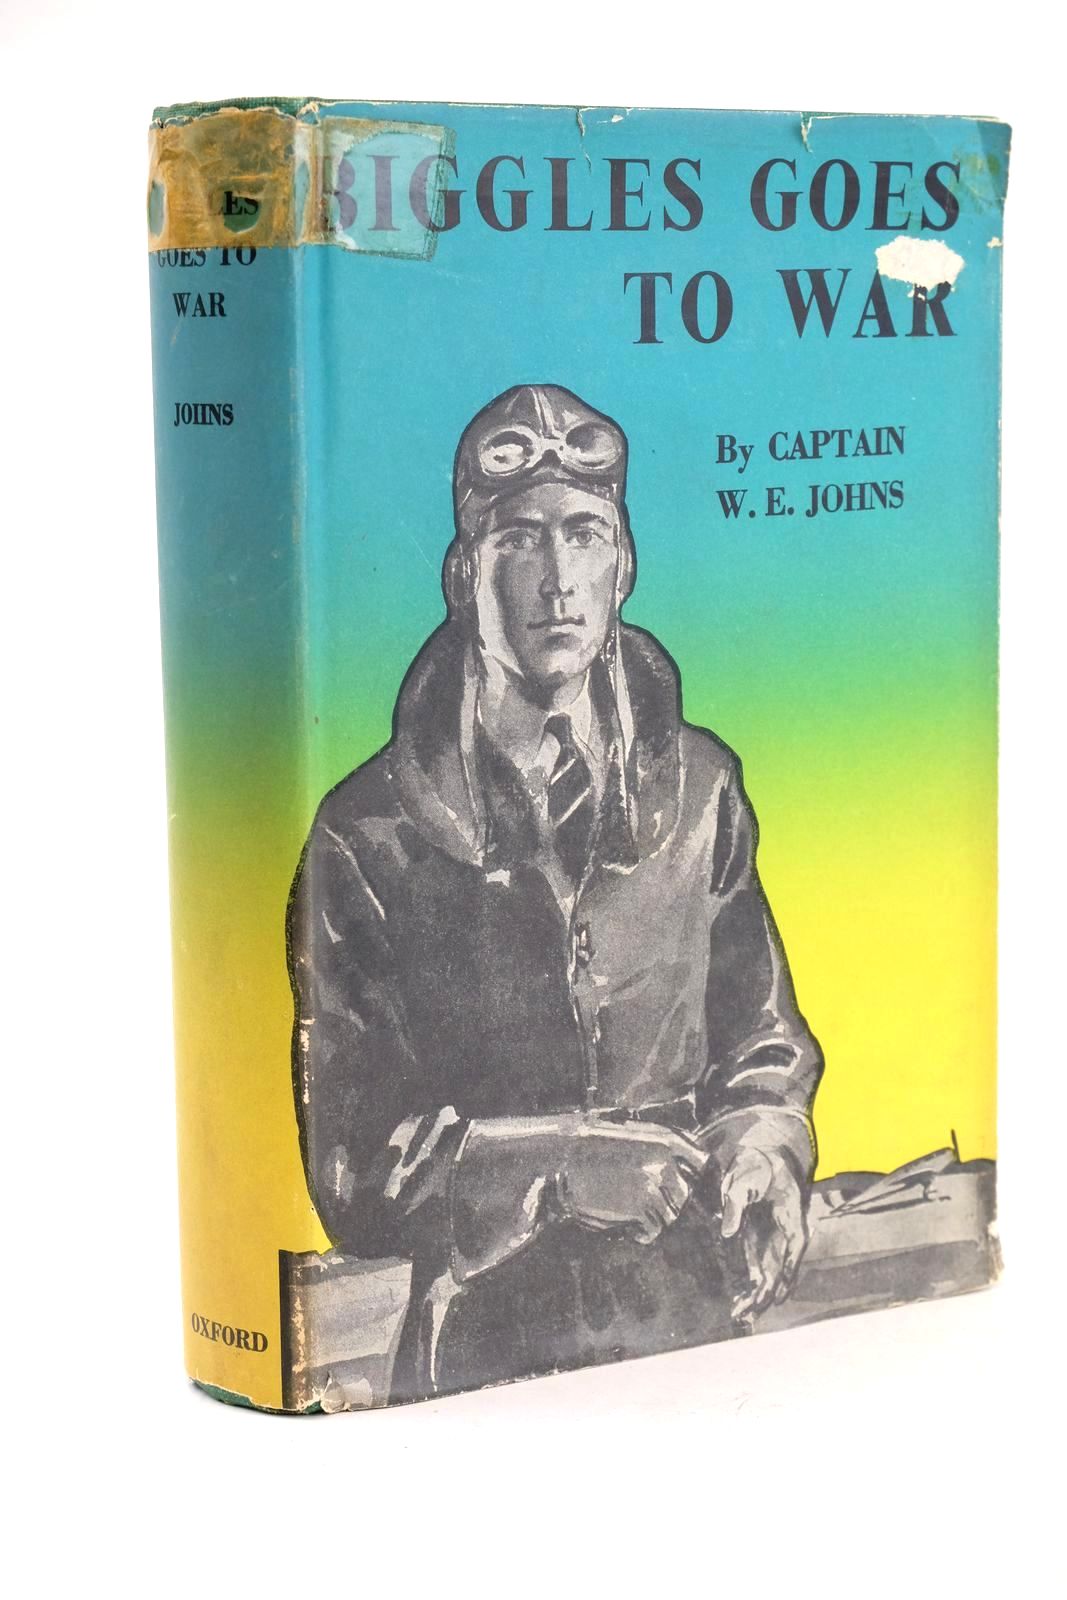 Photo of BIGGLES GOES TO WAR written by Johns, W.E. illustrated by Tyas, Martin published by Oxford University Press, Geoffrey Cumberlege (STOCK CODE: 1324023)  for sale by Stella & Rose's Books